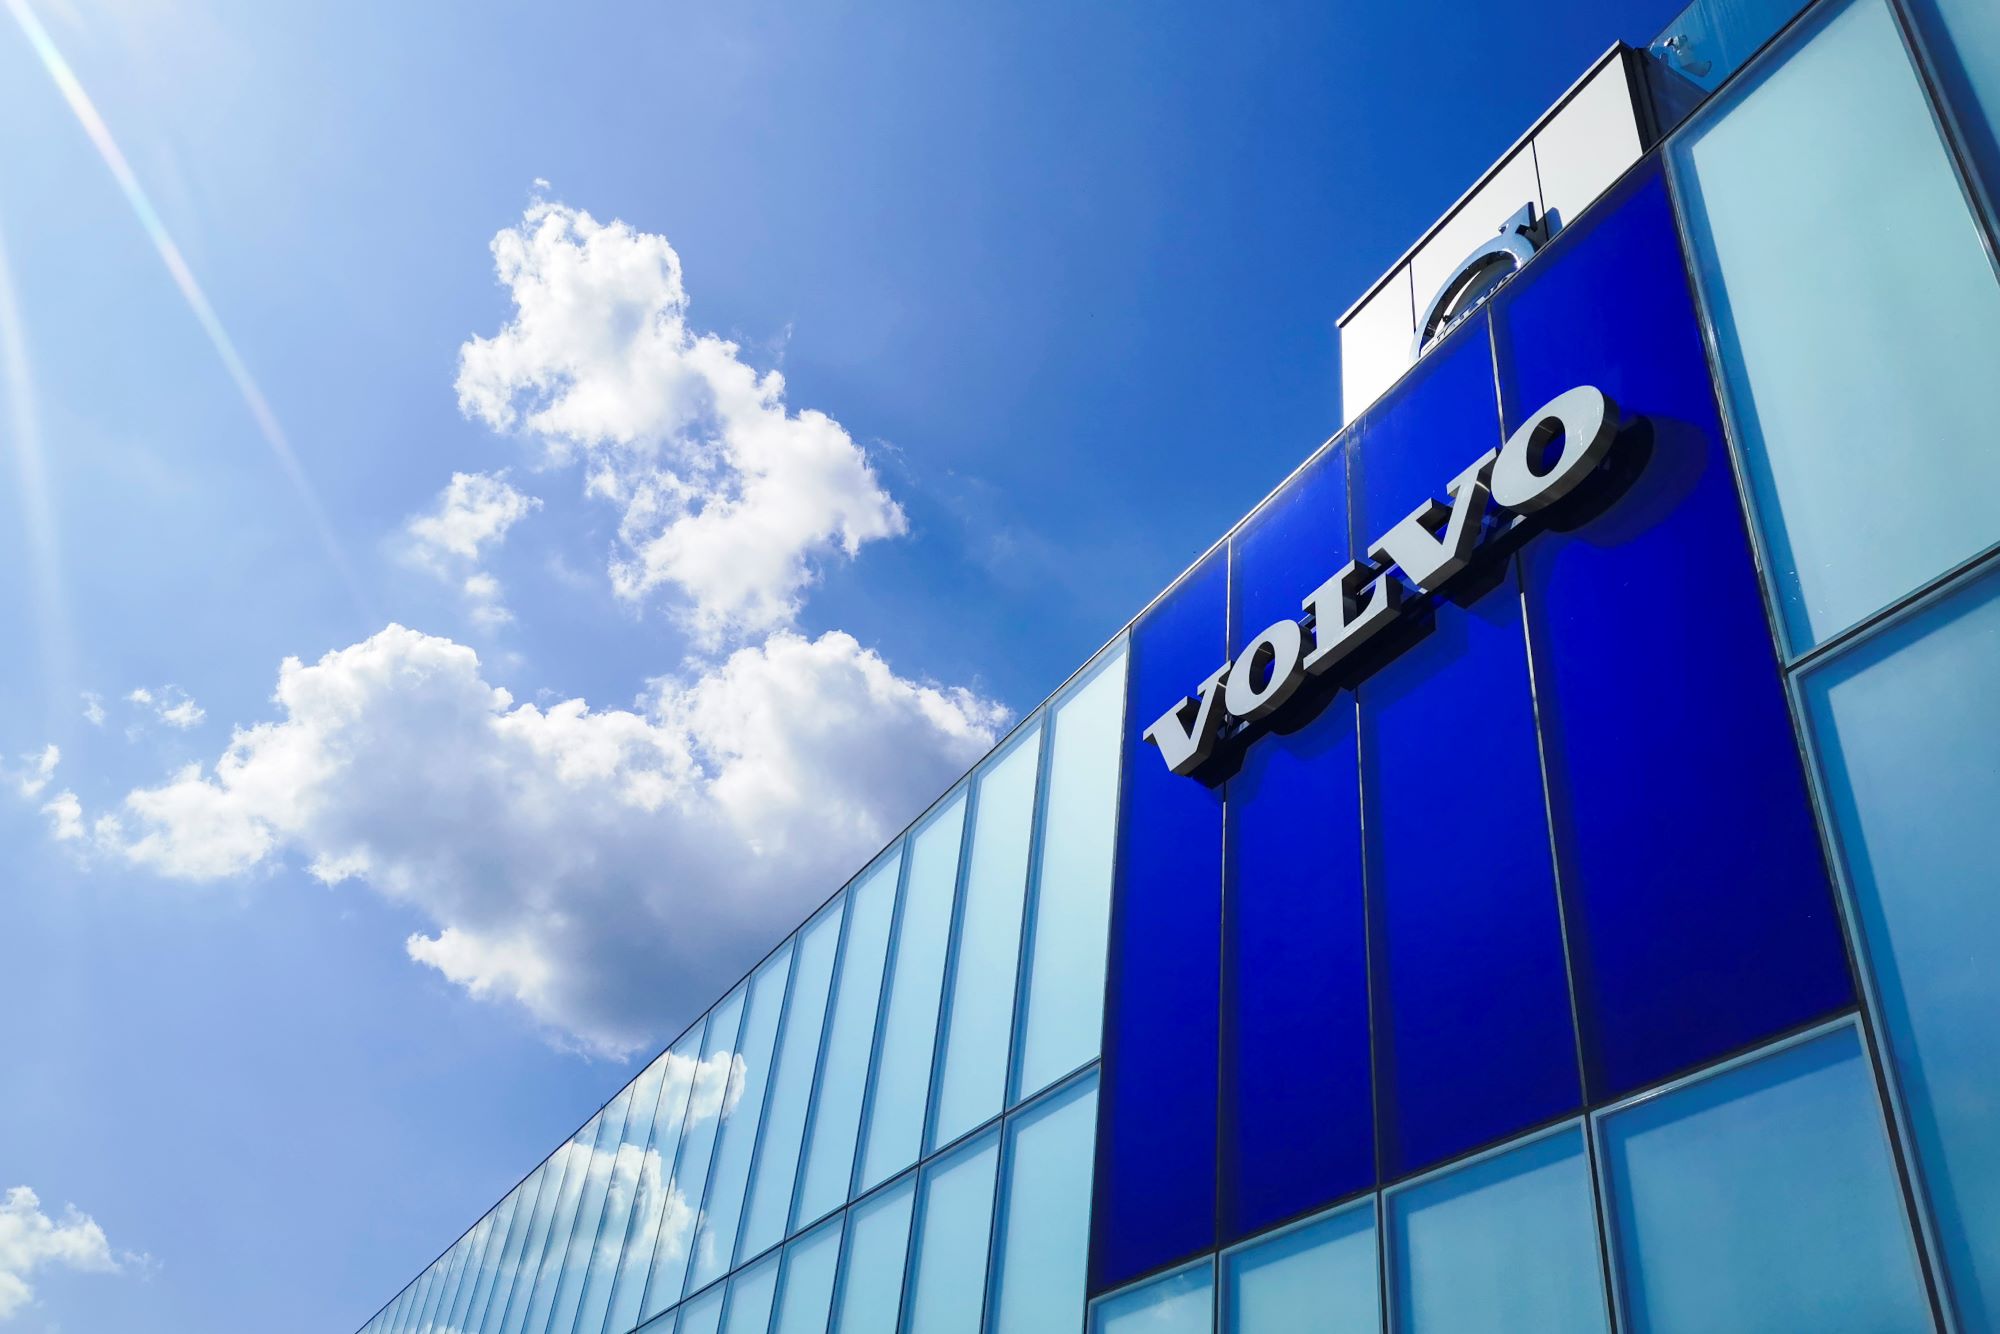 A Volvo dealership building with a light blue and dark blue front.